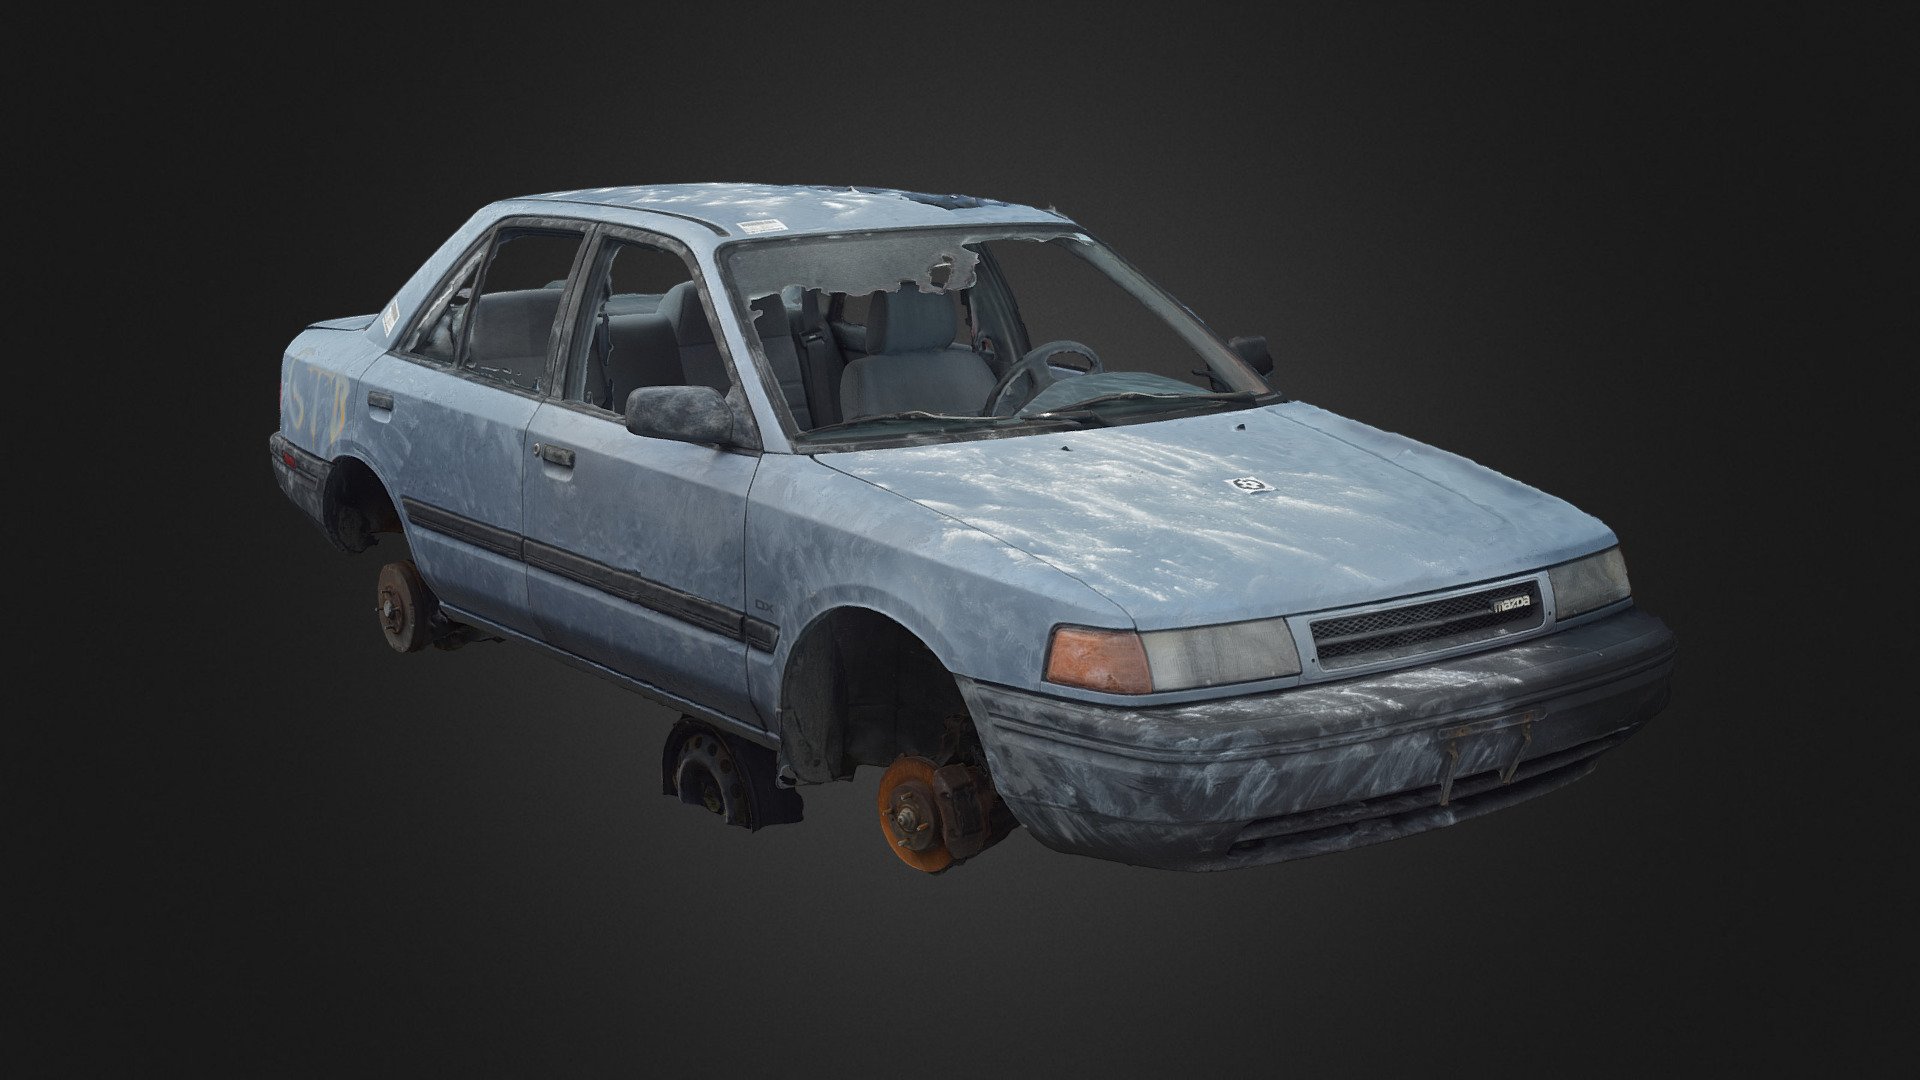 High-accuracy photoscan Intended for use as modeling reference.

Photos taken with my Nikon D3400 and polarizing filter

Created in RealityCapture from 1600 images - 1990-1992 Protegé [Scan] - 3D model by Rush_Freak 3d model